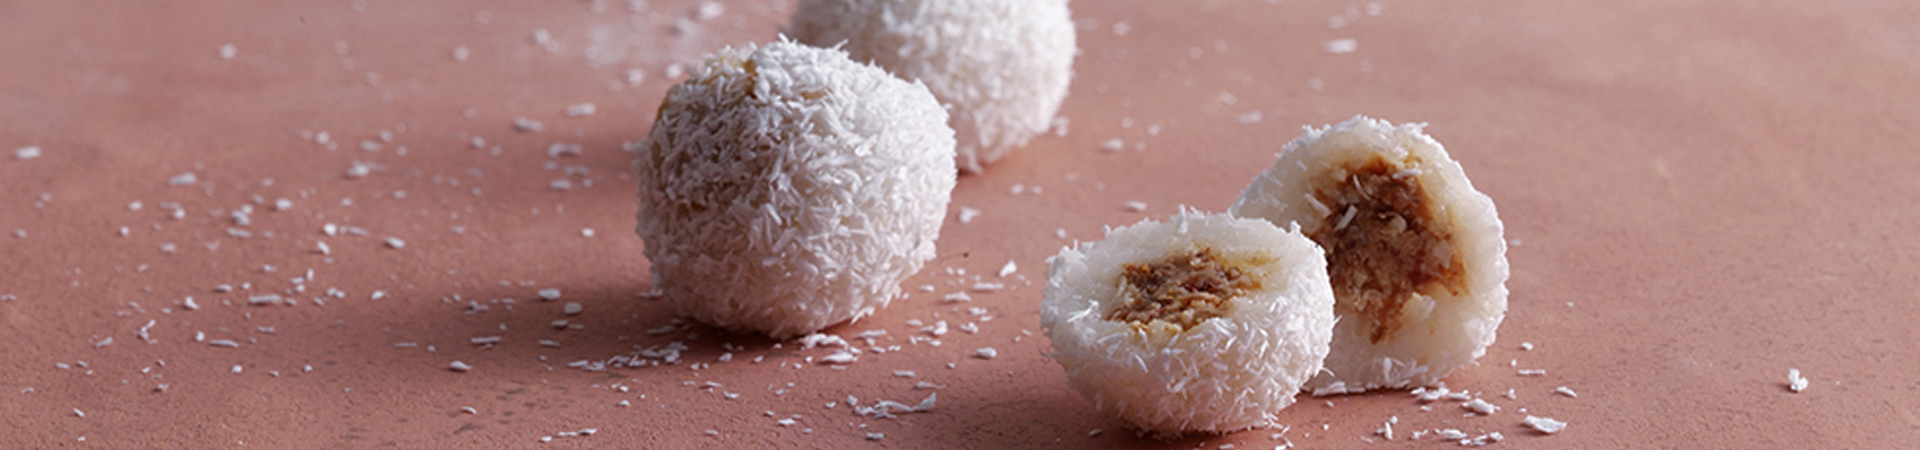 Rice Balls With Coconut, Walnuts And Dates